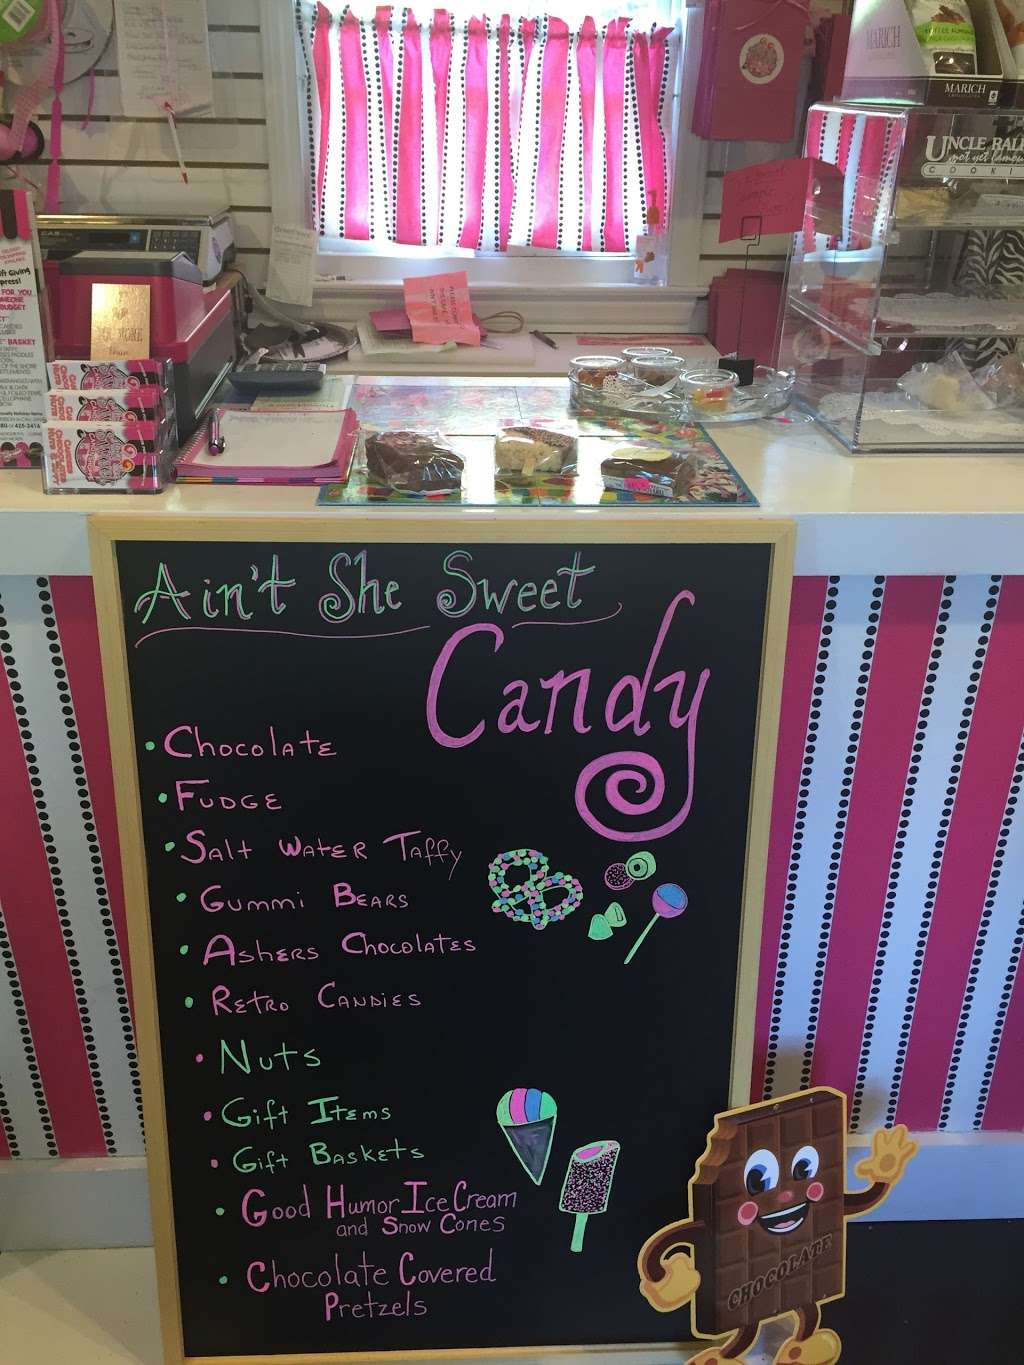 Aint She Sweet Candy Shop | 1943 Route 9 North Woodland Village, Cape May Court House, NJ 08210 | Phone: (609) 624-0002